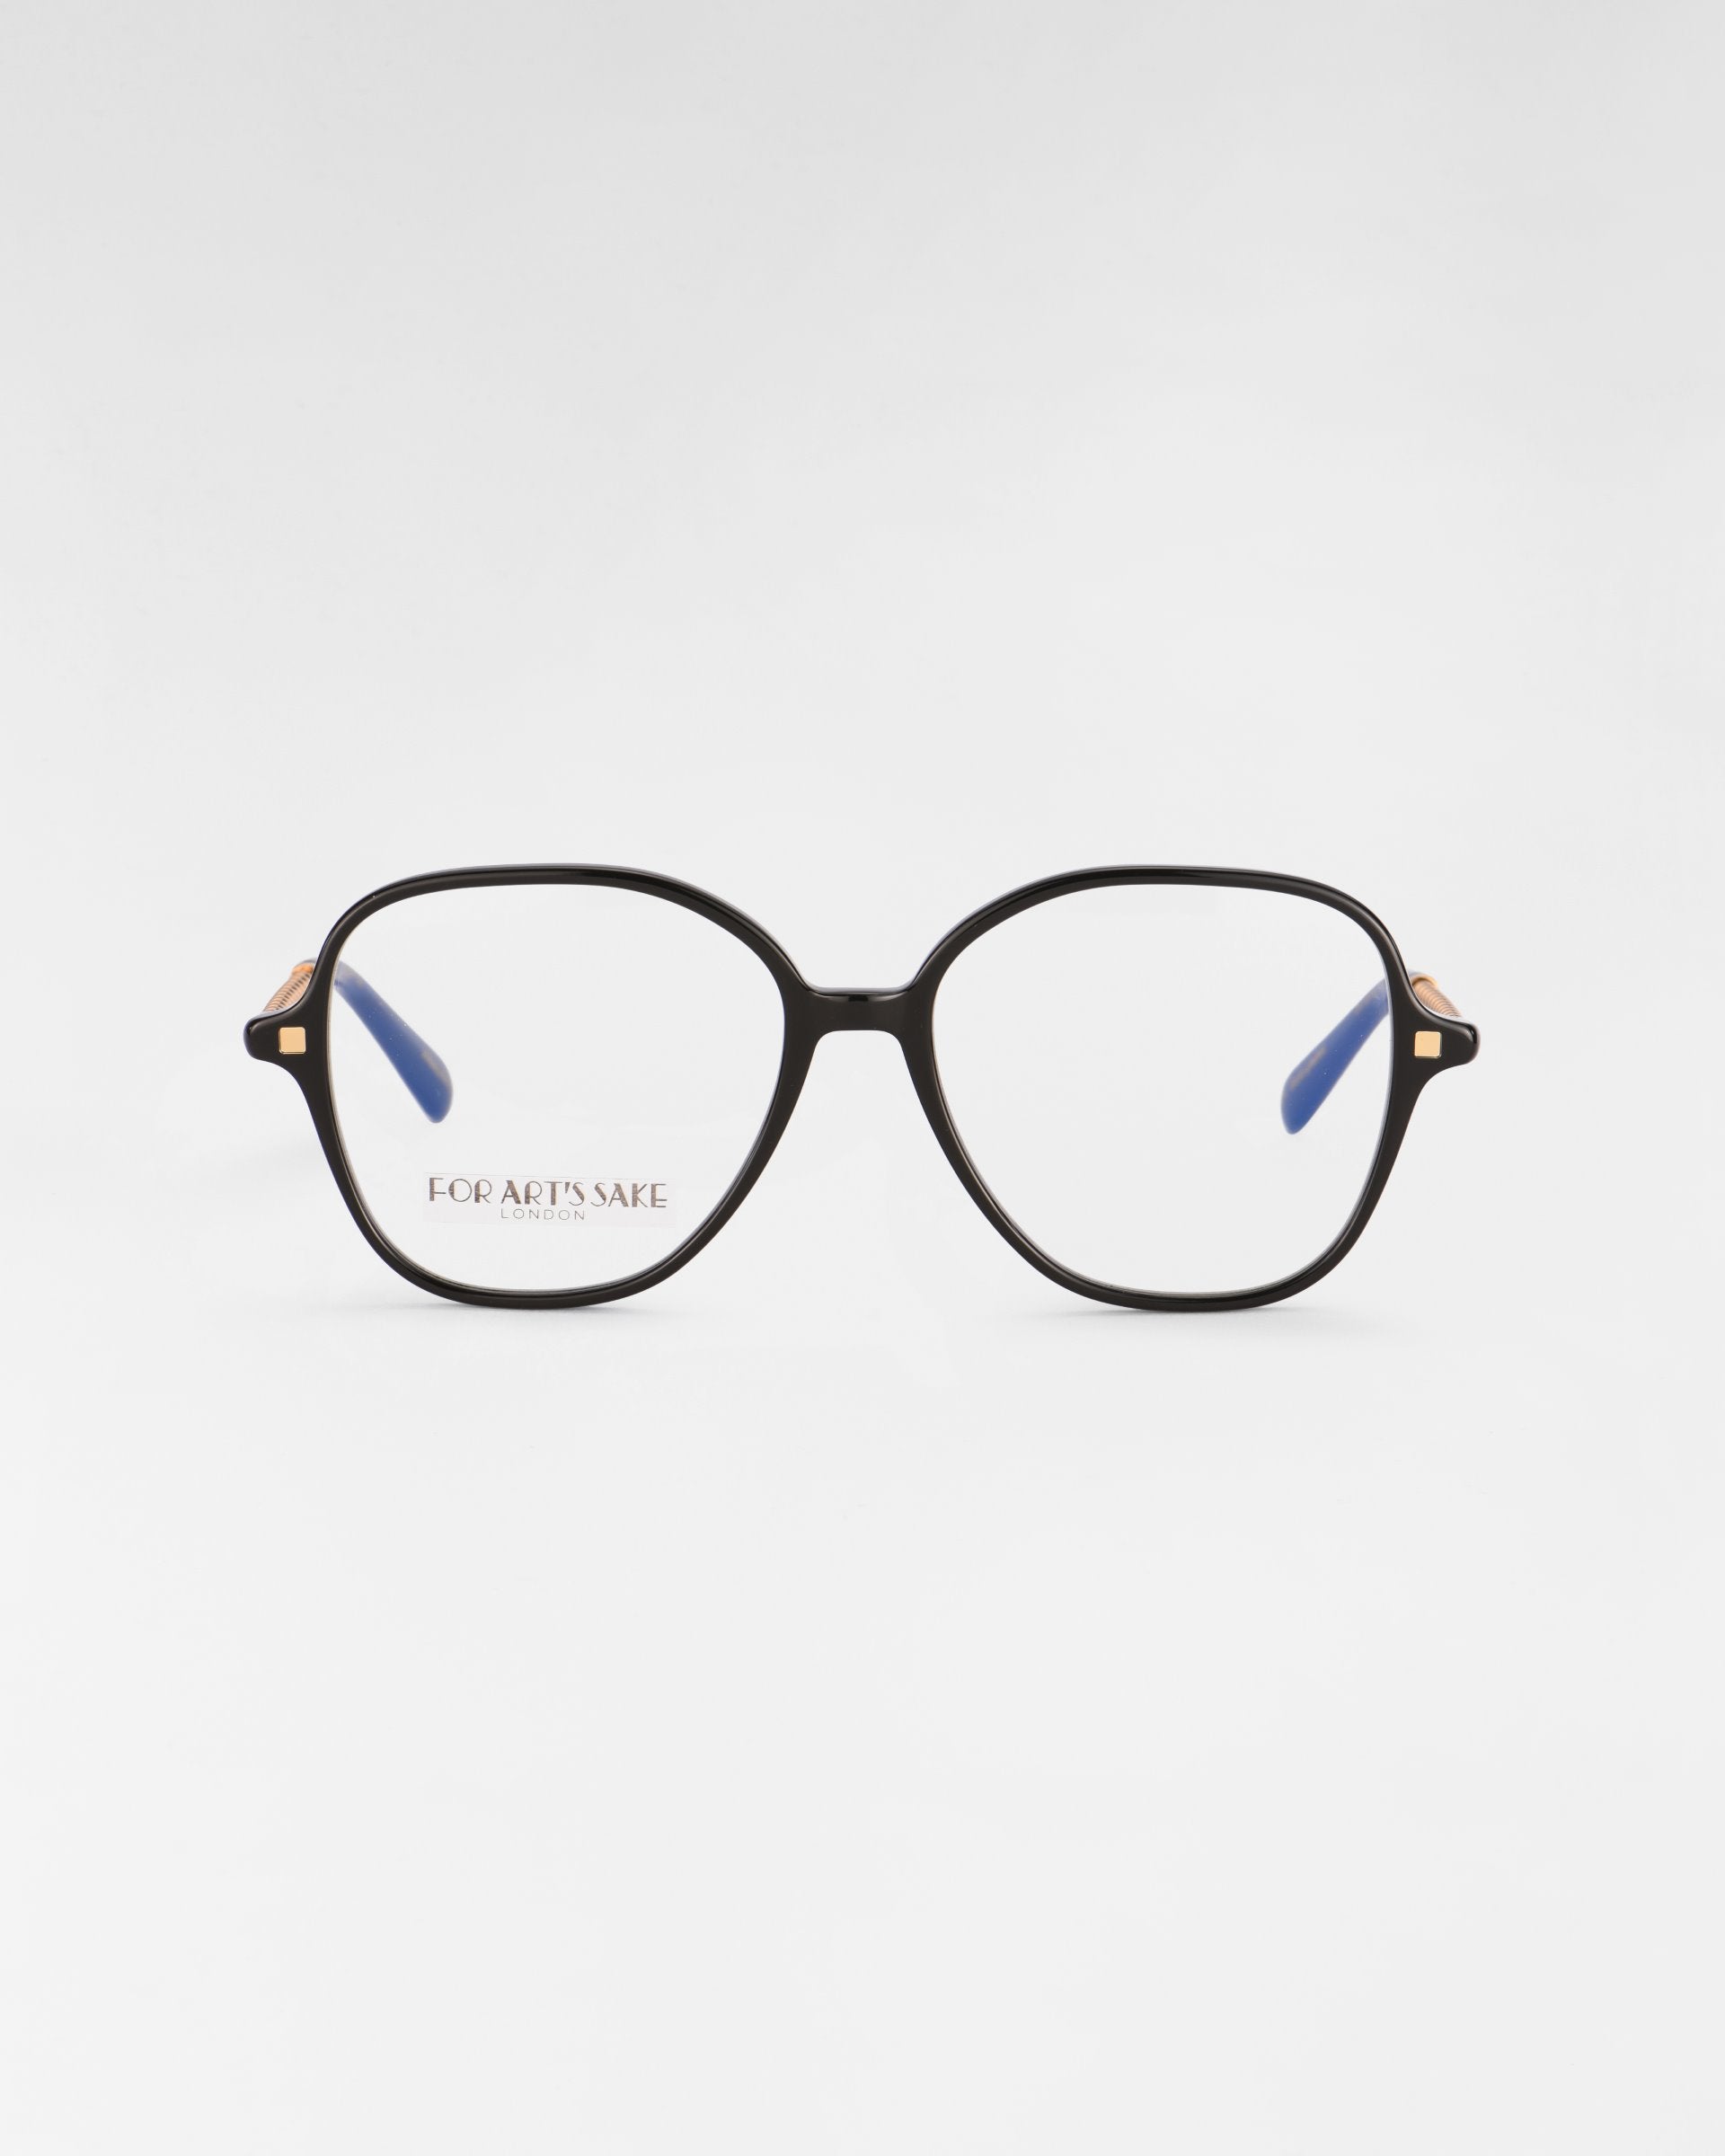 A pair of black-rimmed Dumpling eyeglasses with a slight geometric shape. The glasses have clear lenses featuring a blue light filter, and the inside arms are blue. The words &quot;For Art&#39;s Sake®&quot; are visible on the left lens. The glasses are set against a plain white background.